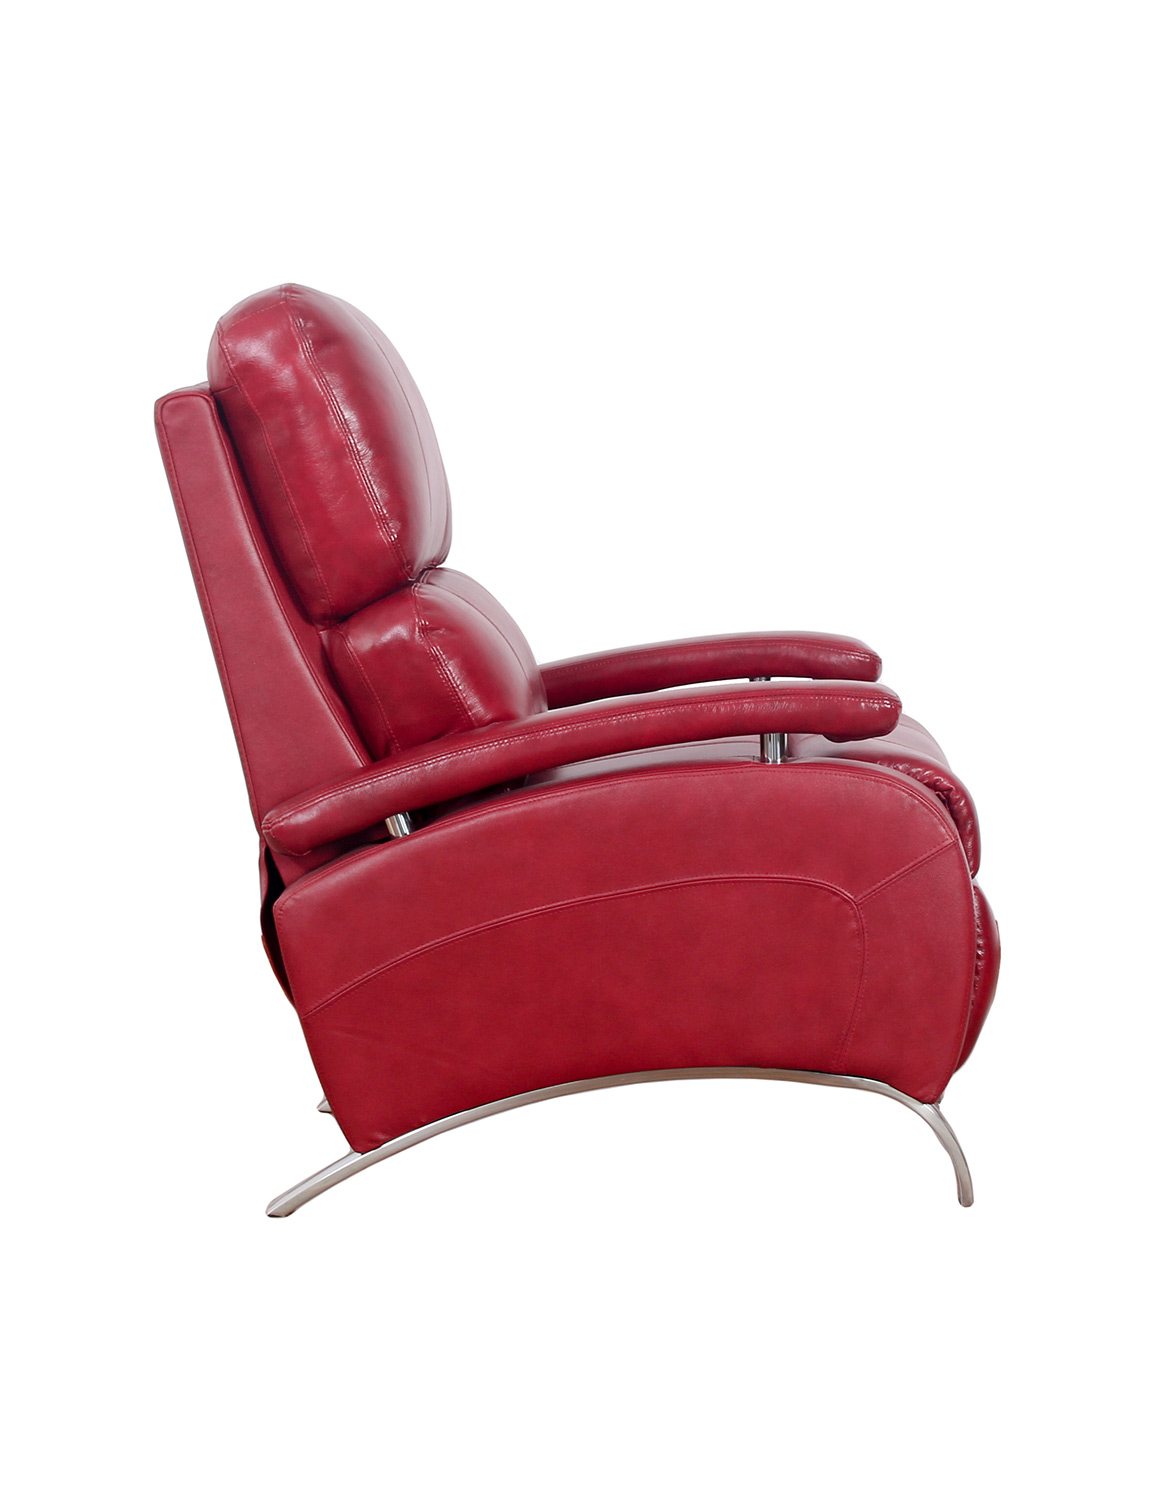 Barcalounger Oracle Recliner Chair - Stargo Red/Leather Match